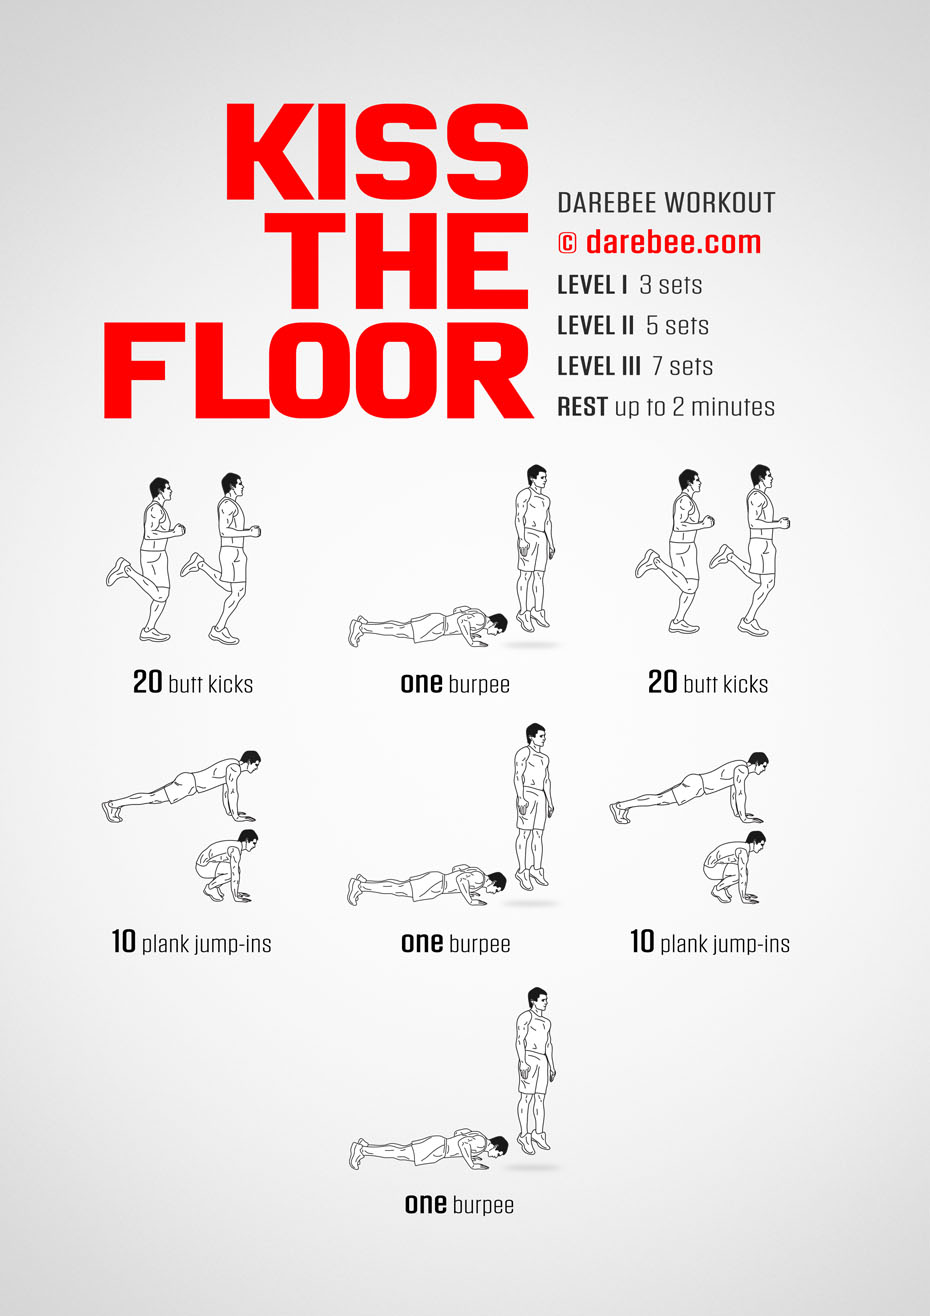 Kiss The Floor is a Darebee home-fitness no-equipment cardiovascular and aerobic workout that will leave you gasping for breath. 